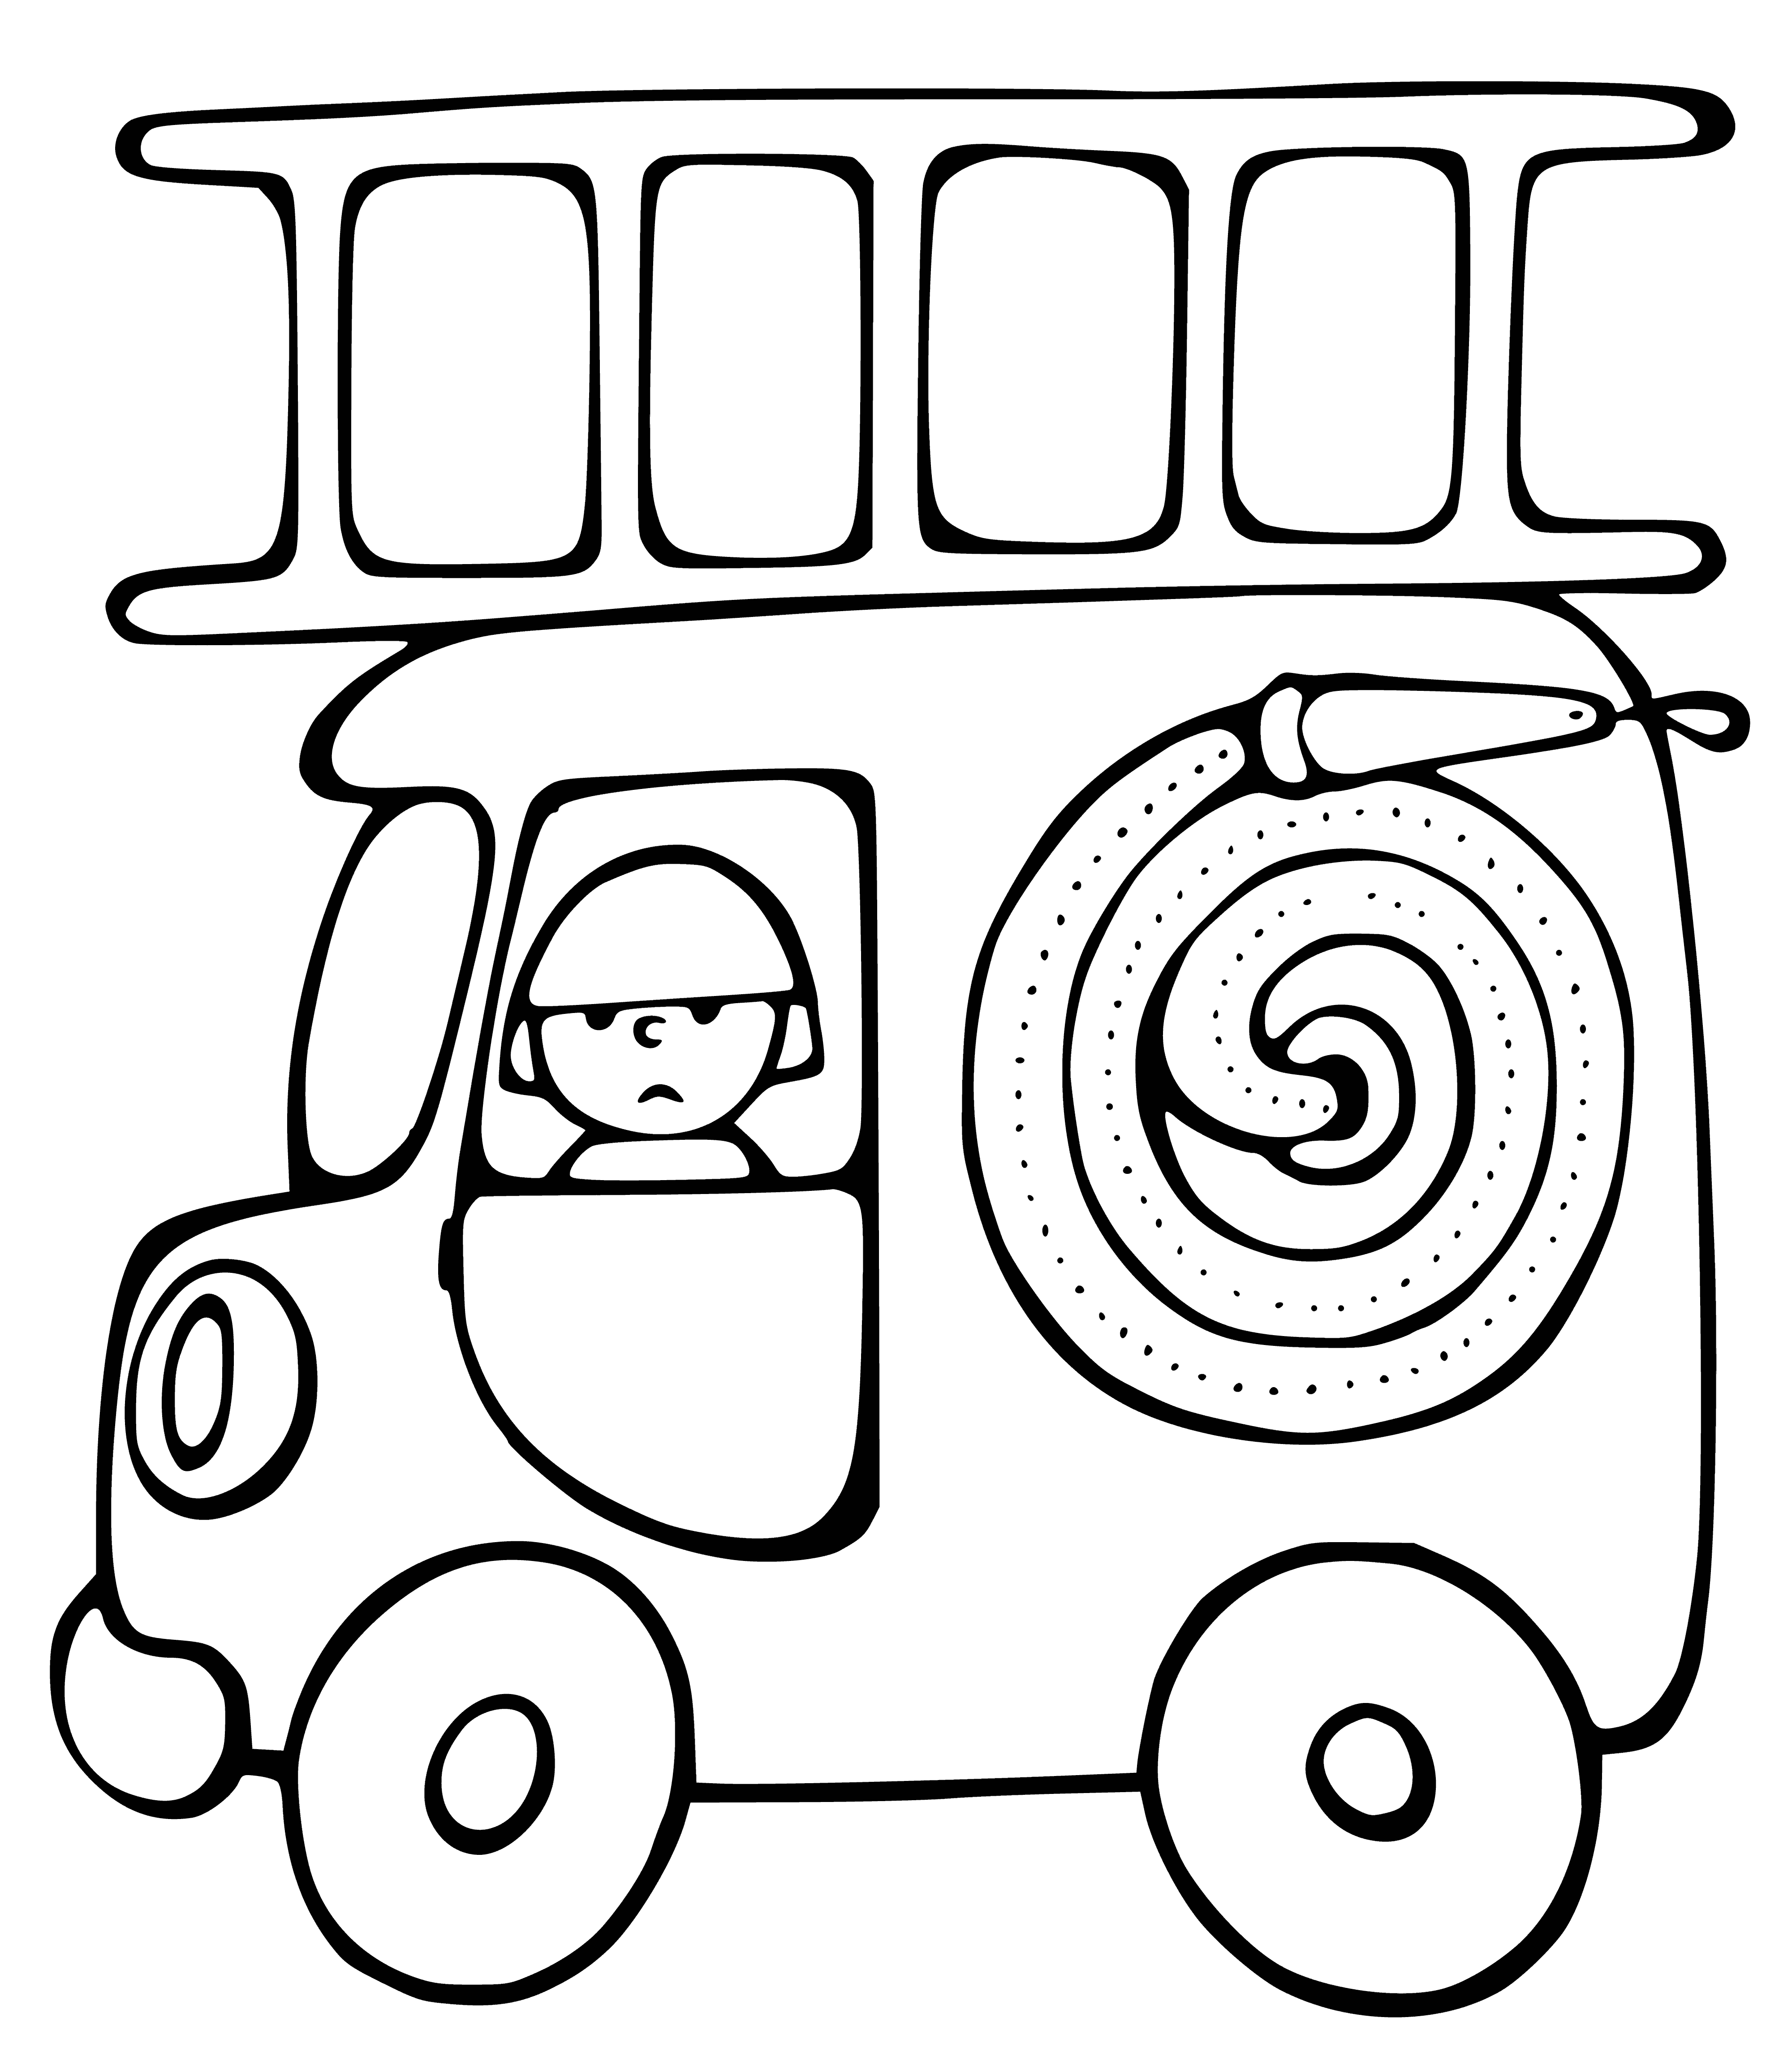 coloring page: Fire engine has a pump, hose & ladder to douse fires & rescue people from burning bldgs.